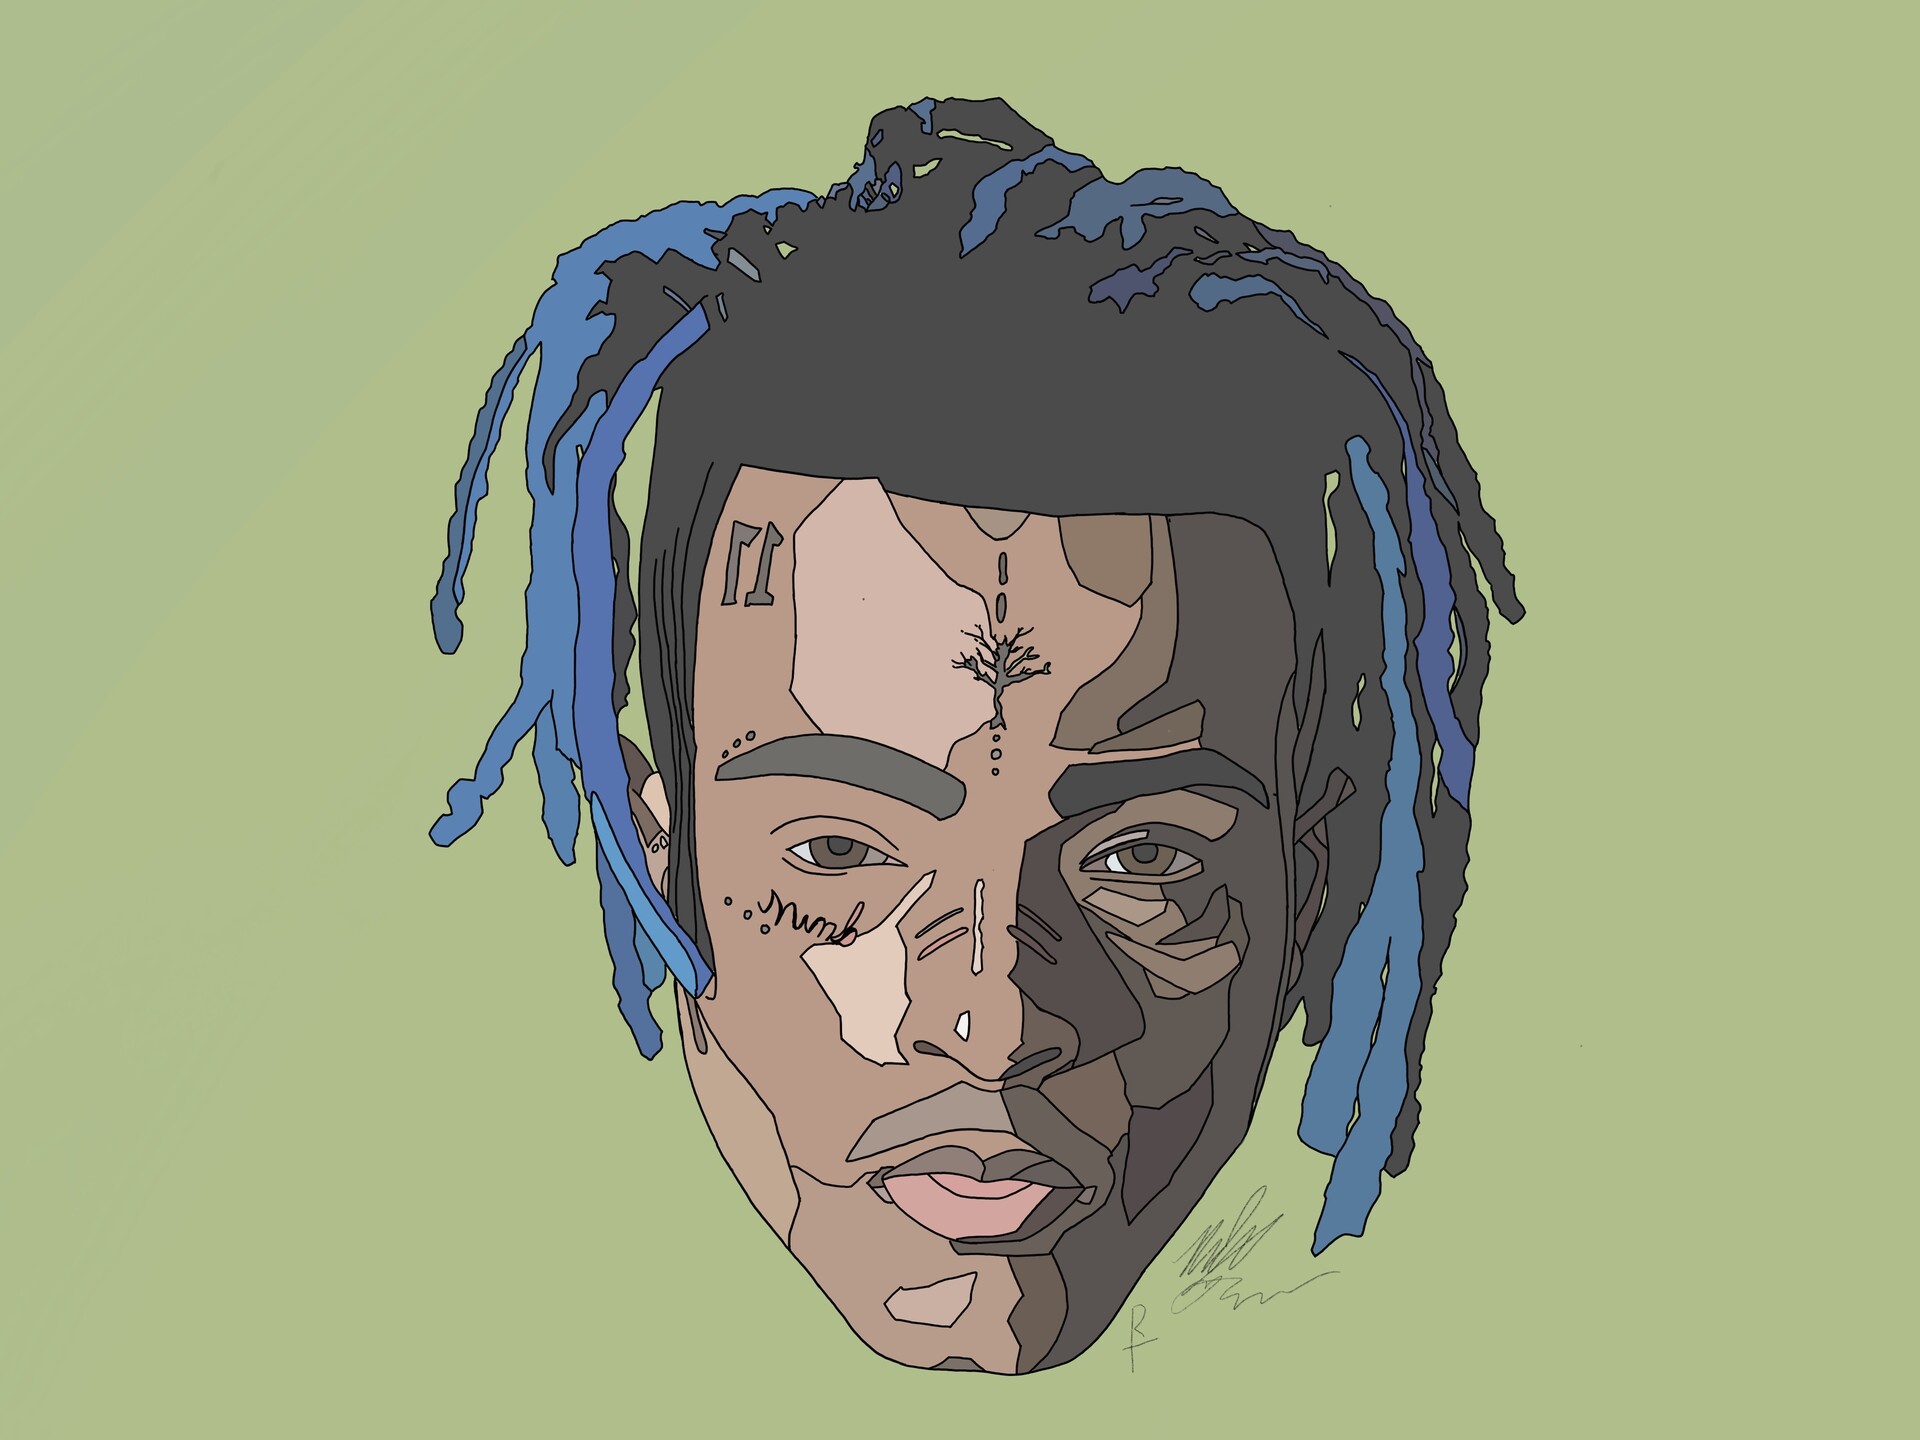 X, tribute to XXXTENTACION and his son that just turned one. 